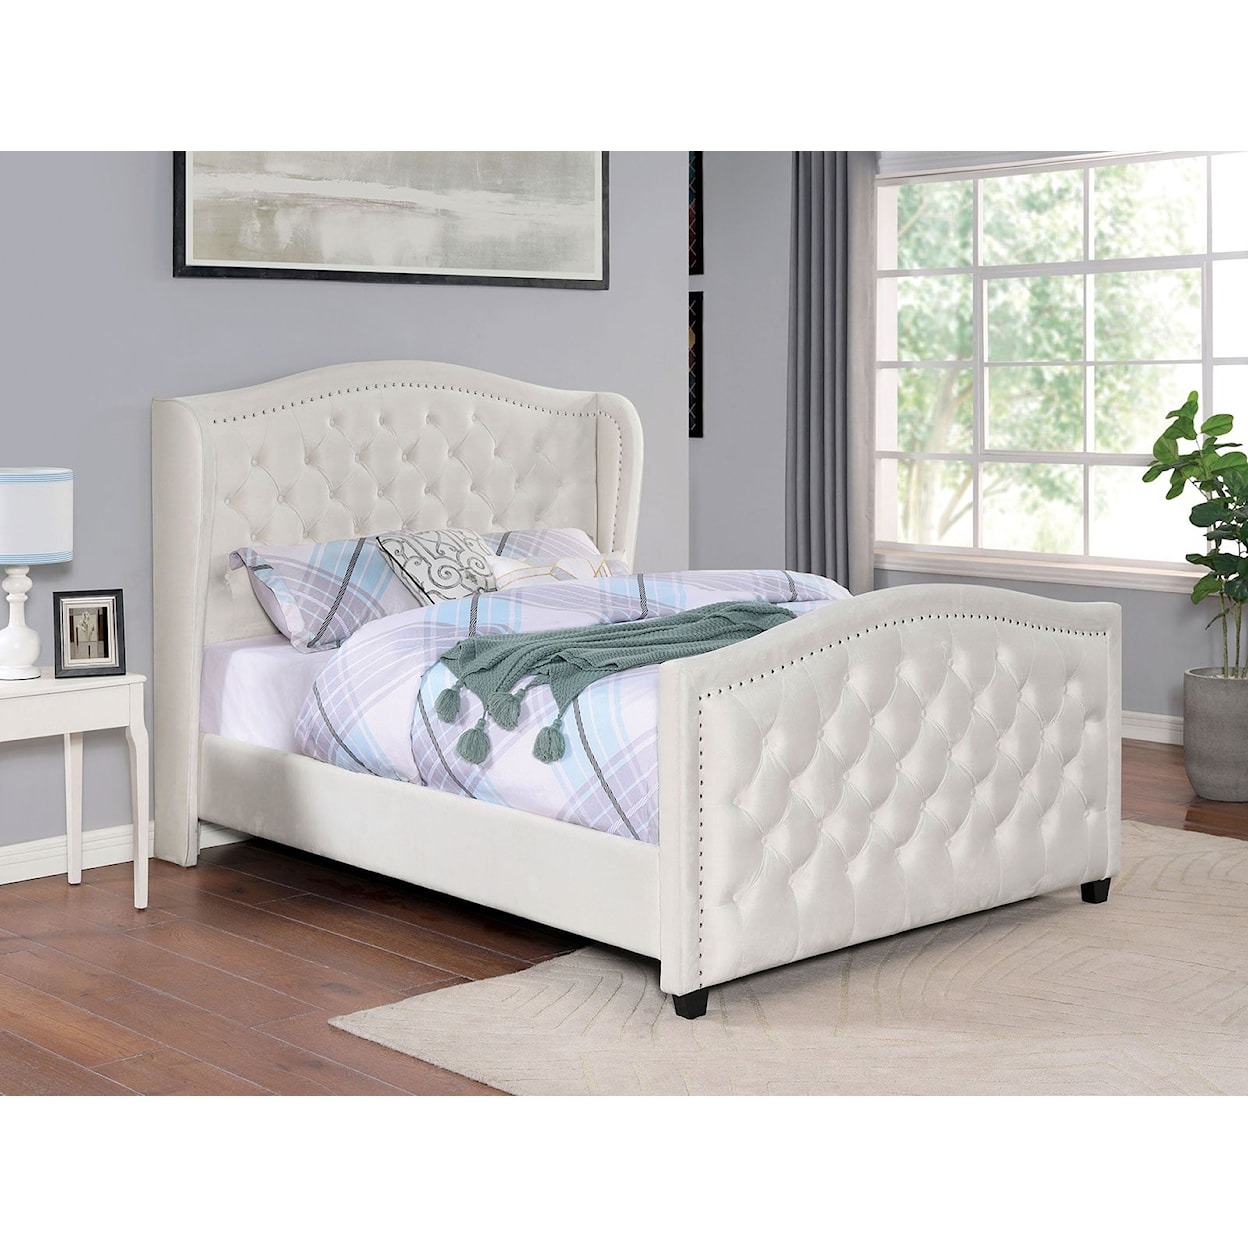 Furniture of America Kerran Upholstered King Bed with Button Tufting